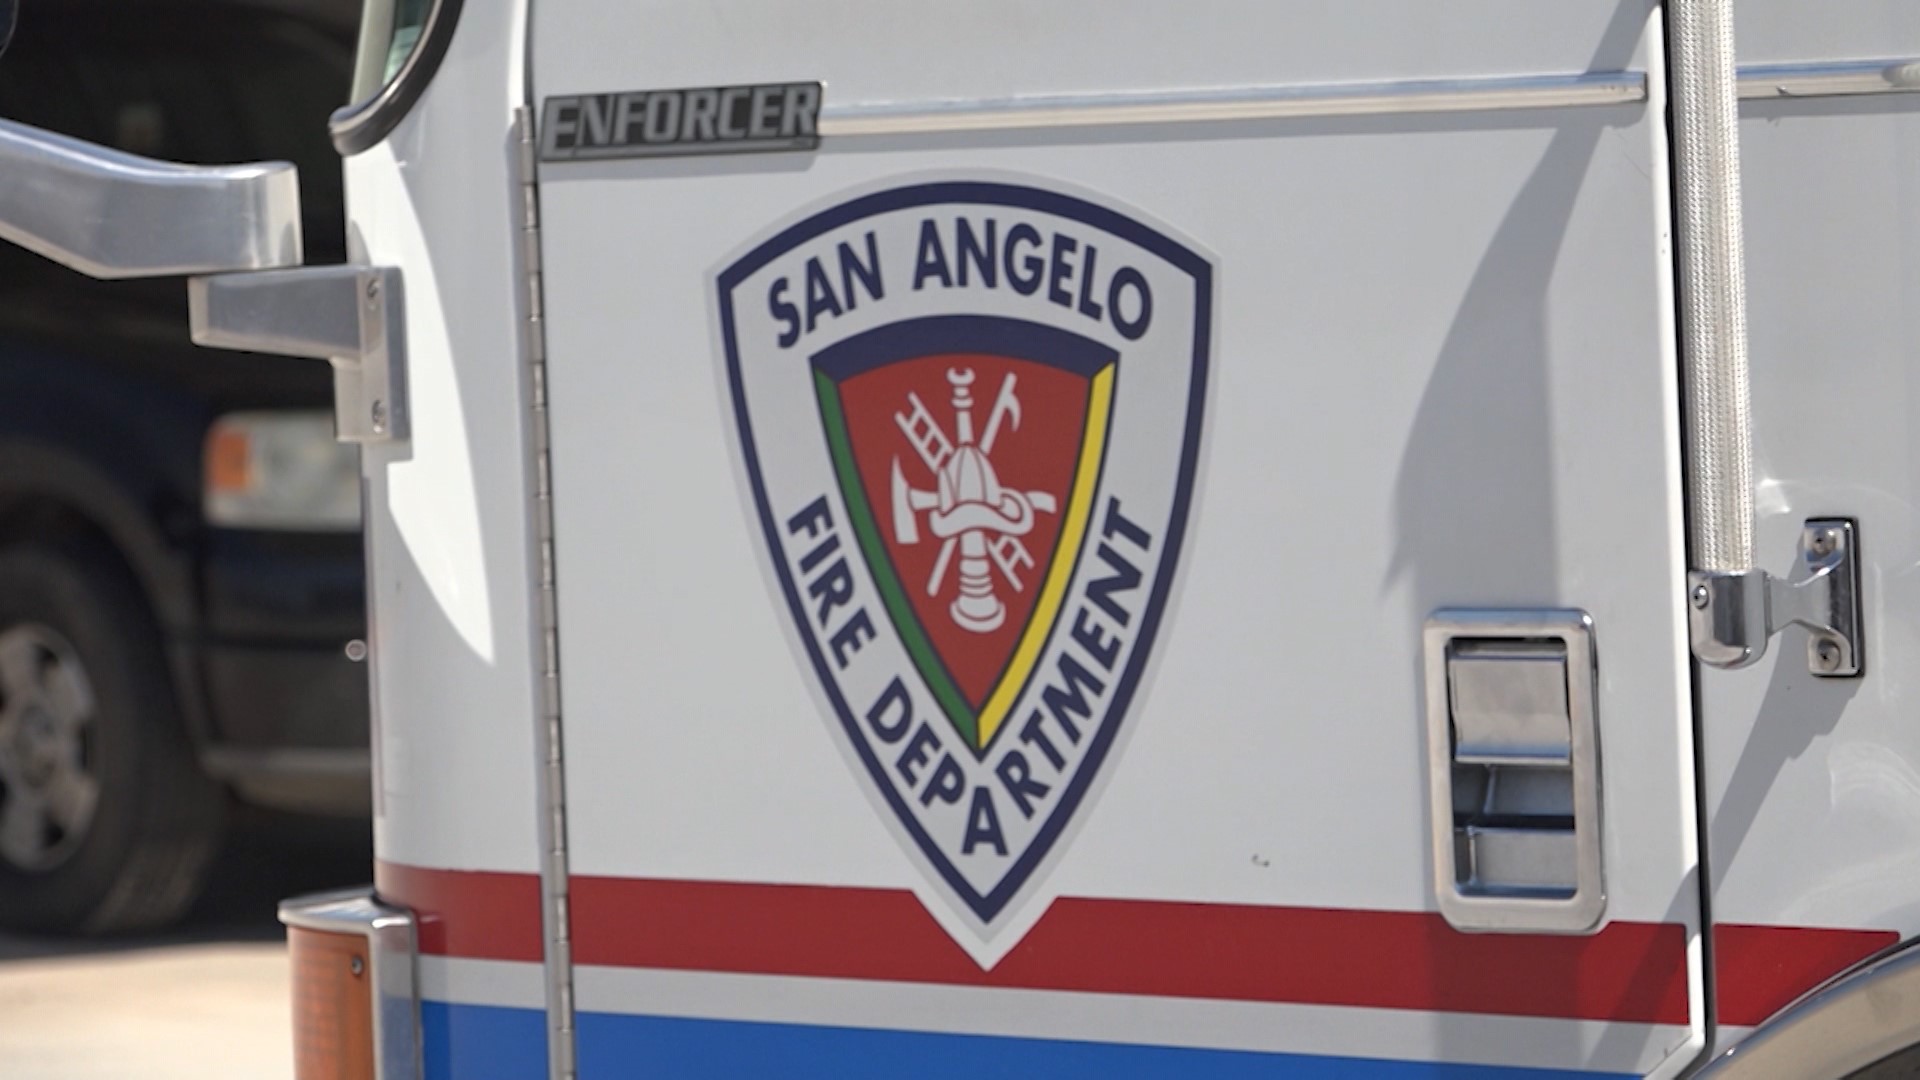 San Angelo fire chief Brian Dunn said his department is in desperate need of private ambulance services, which are currently prohibited in the city.